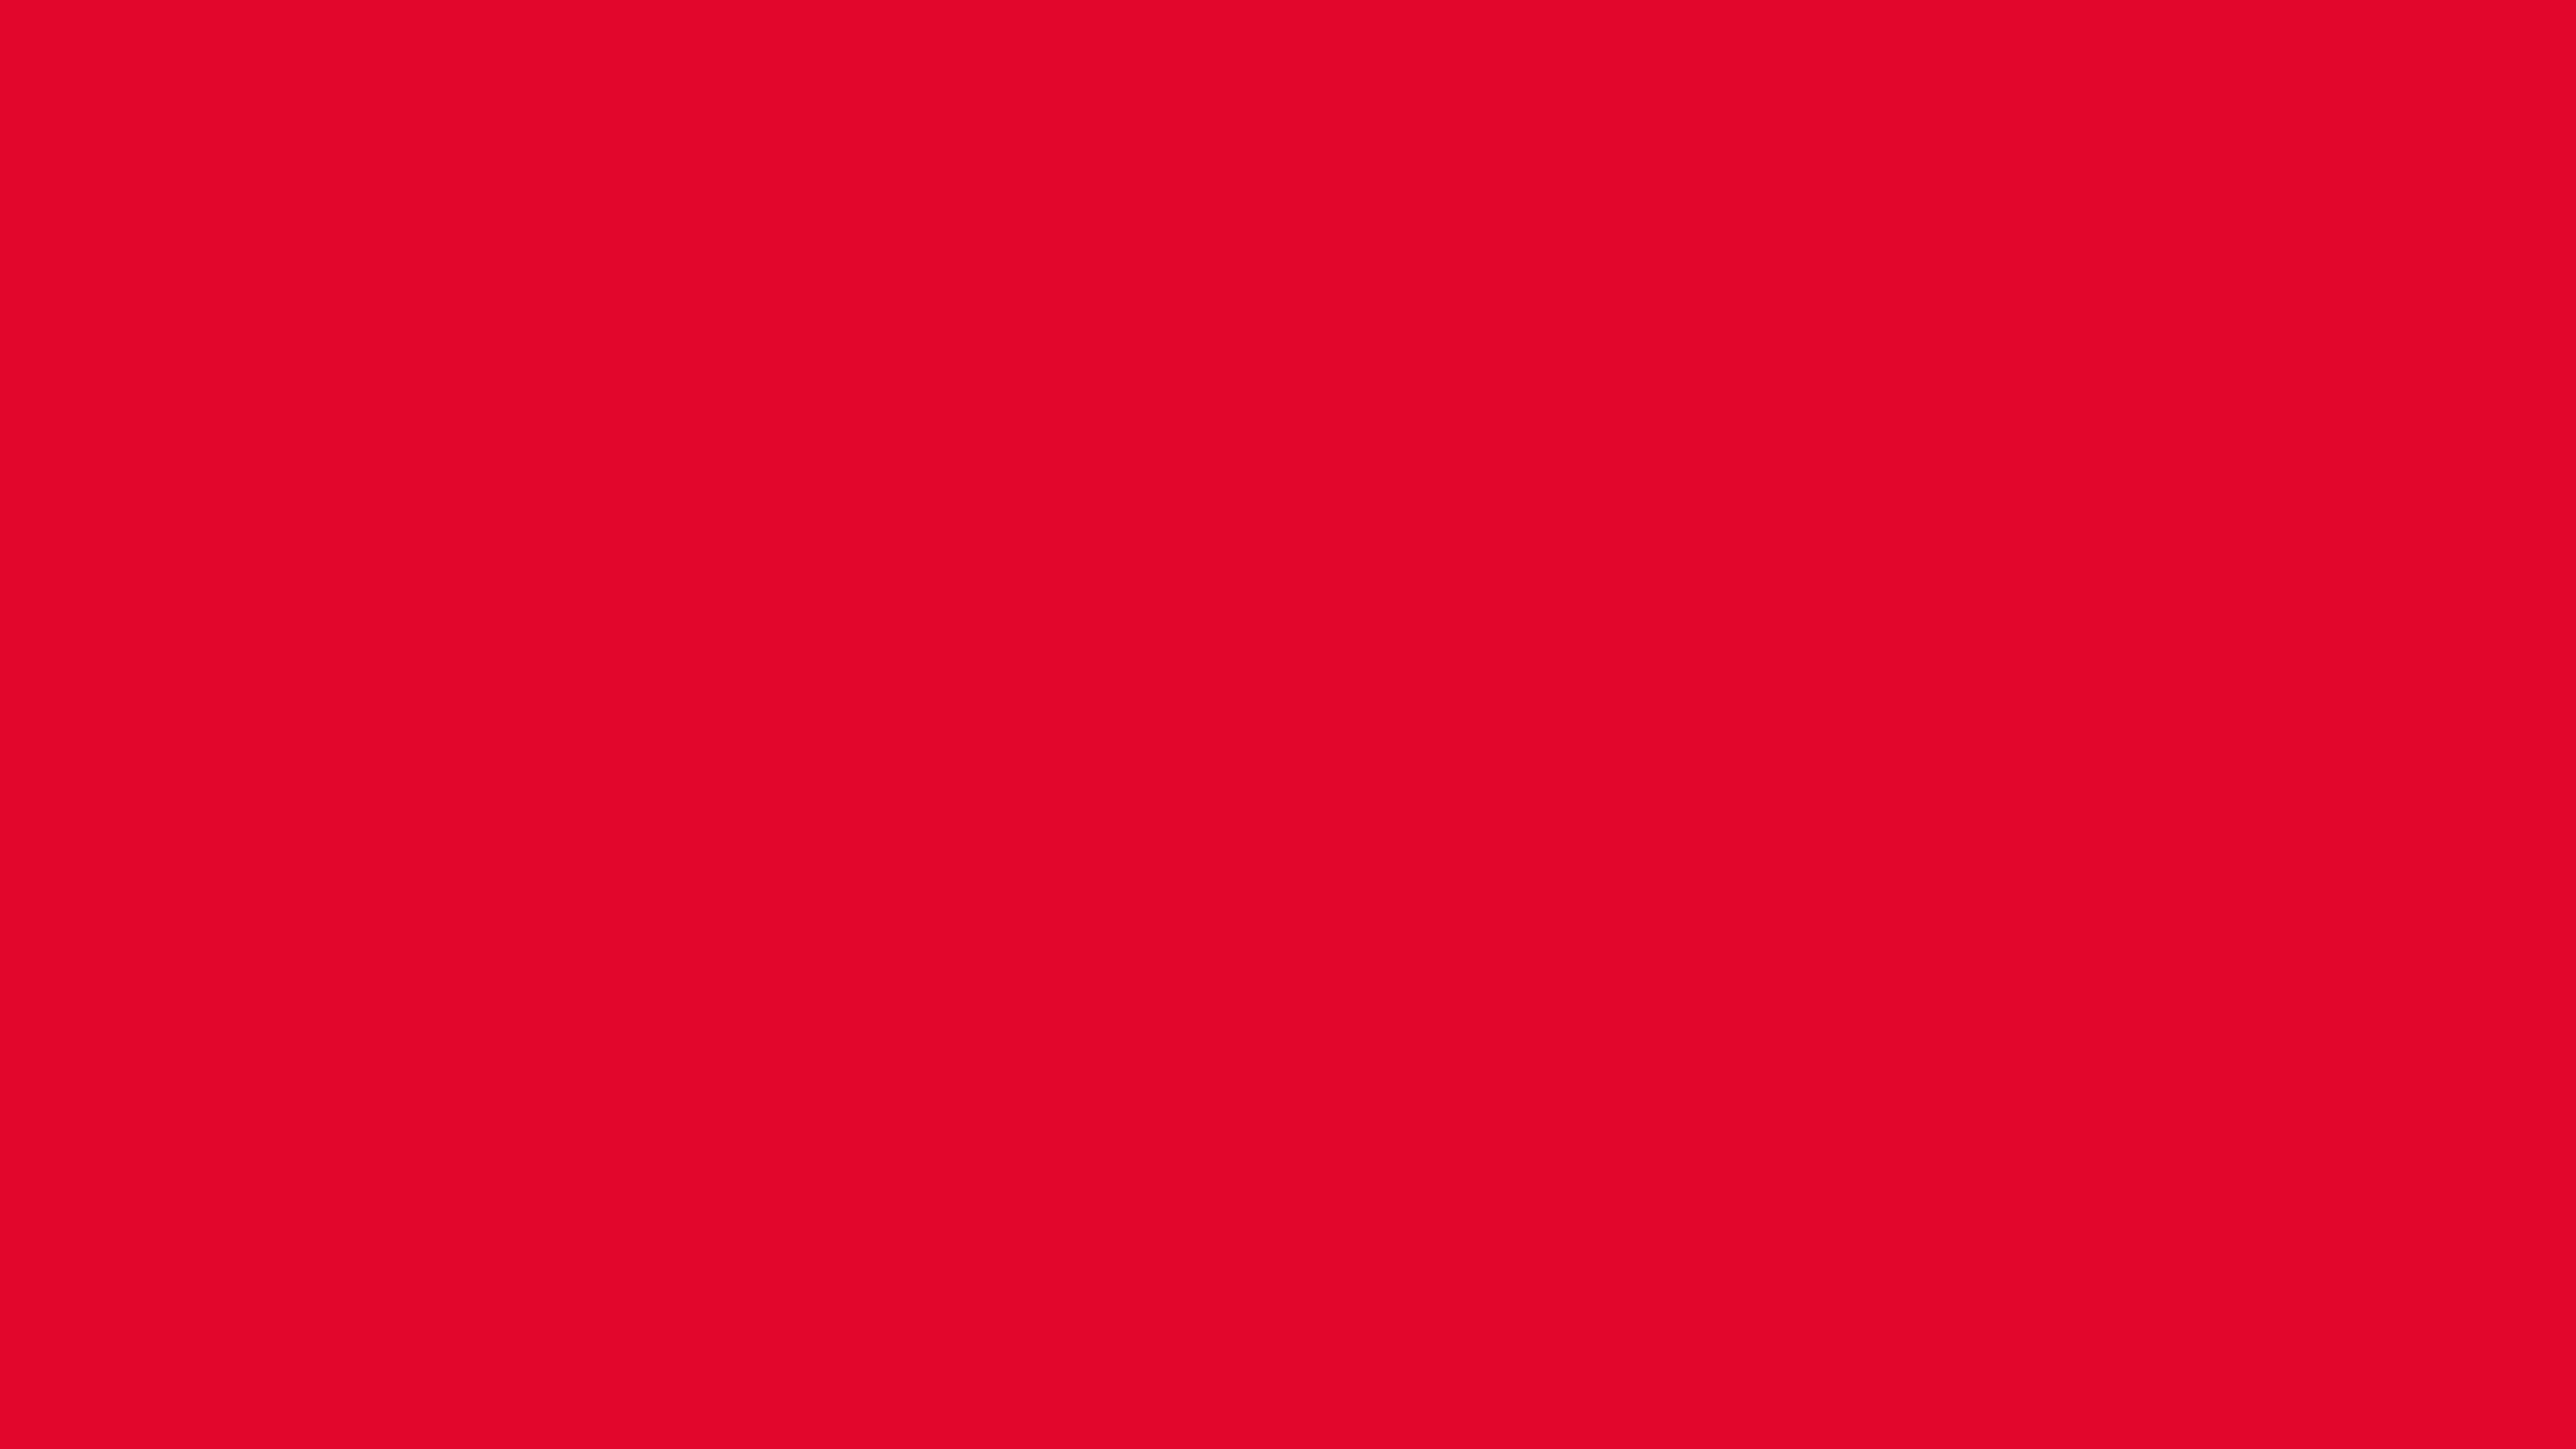 7680x4320 Medium Candy Apple Red Solid Color Background